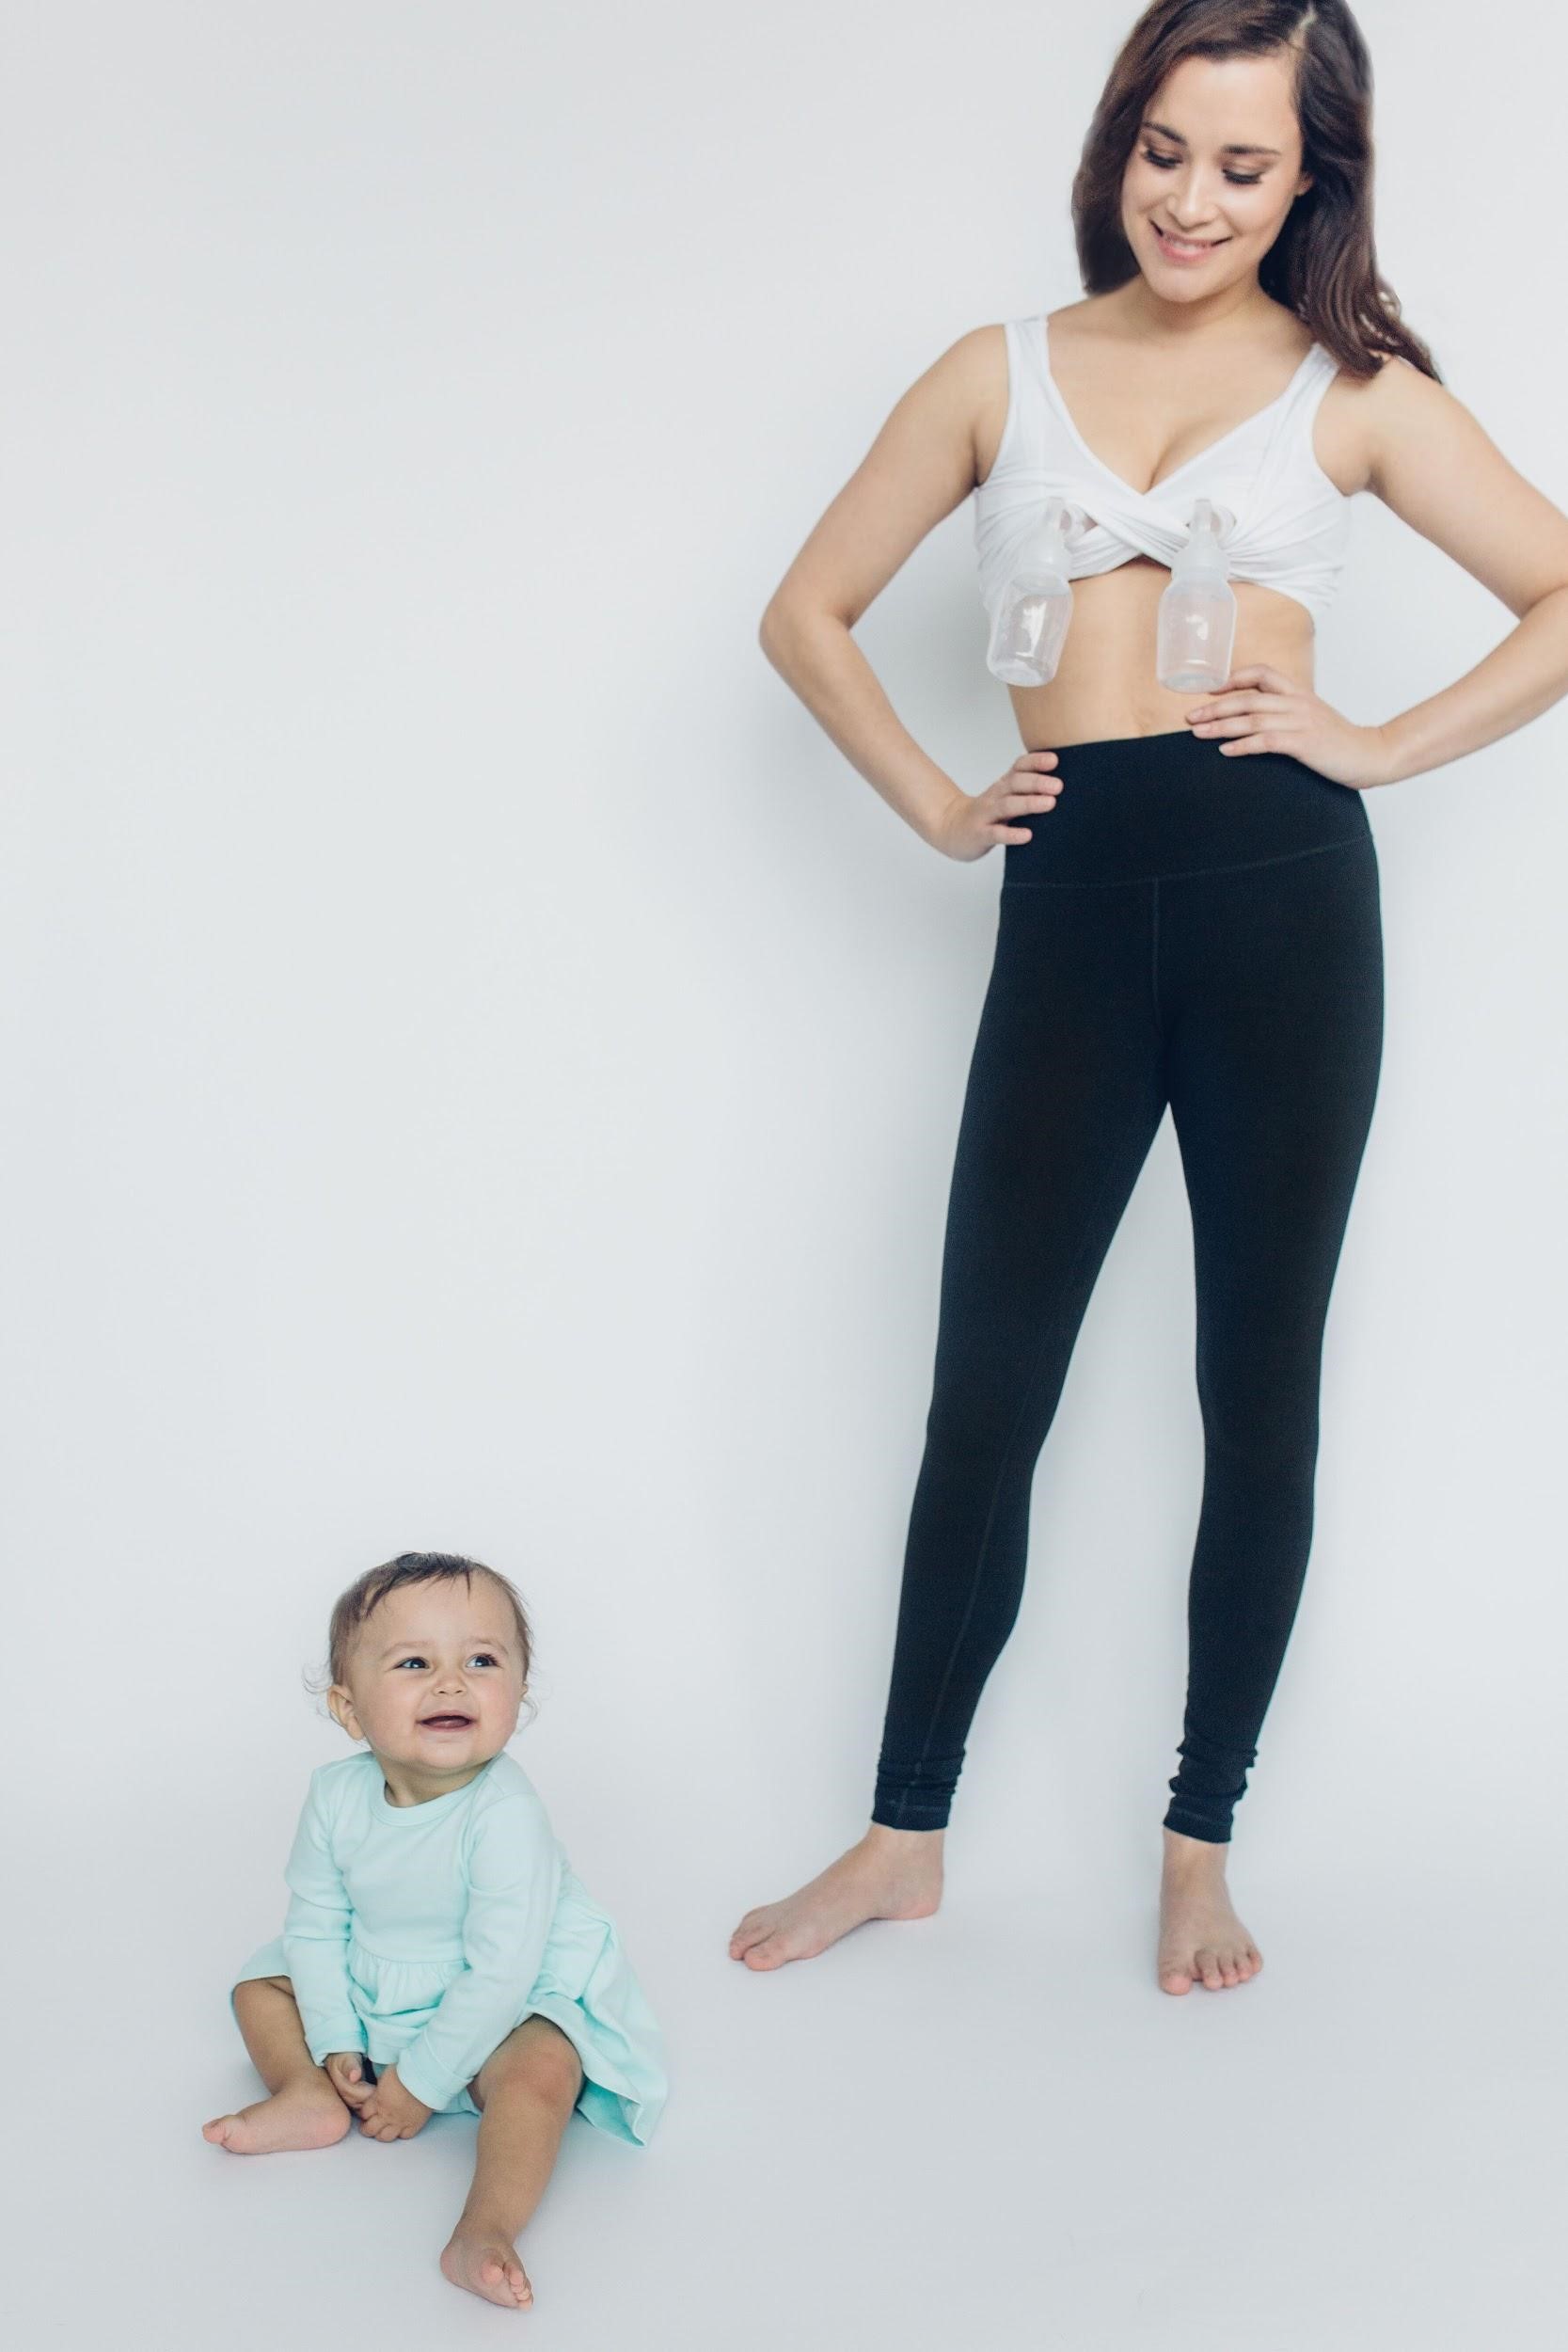 Meet the New Bra That Is Making Nursing and Pumping Easier - Mom